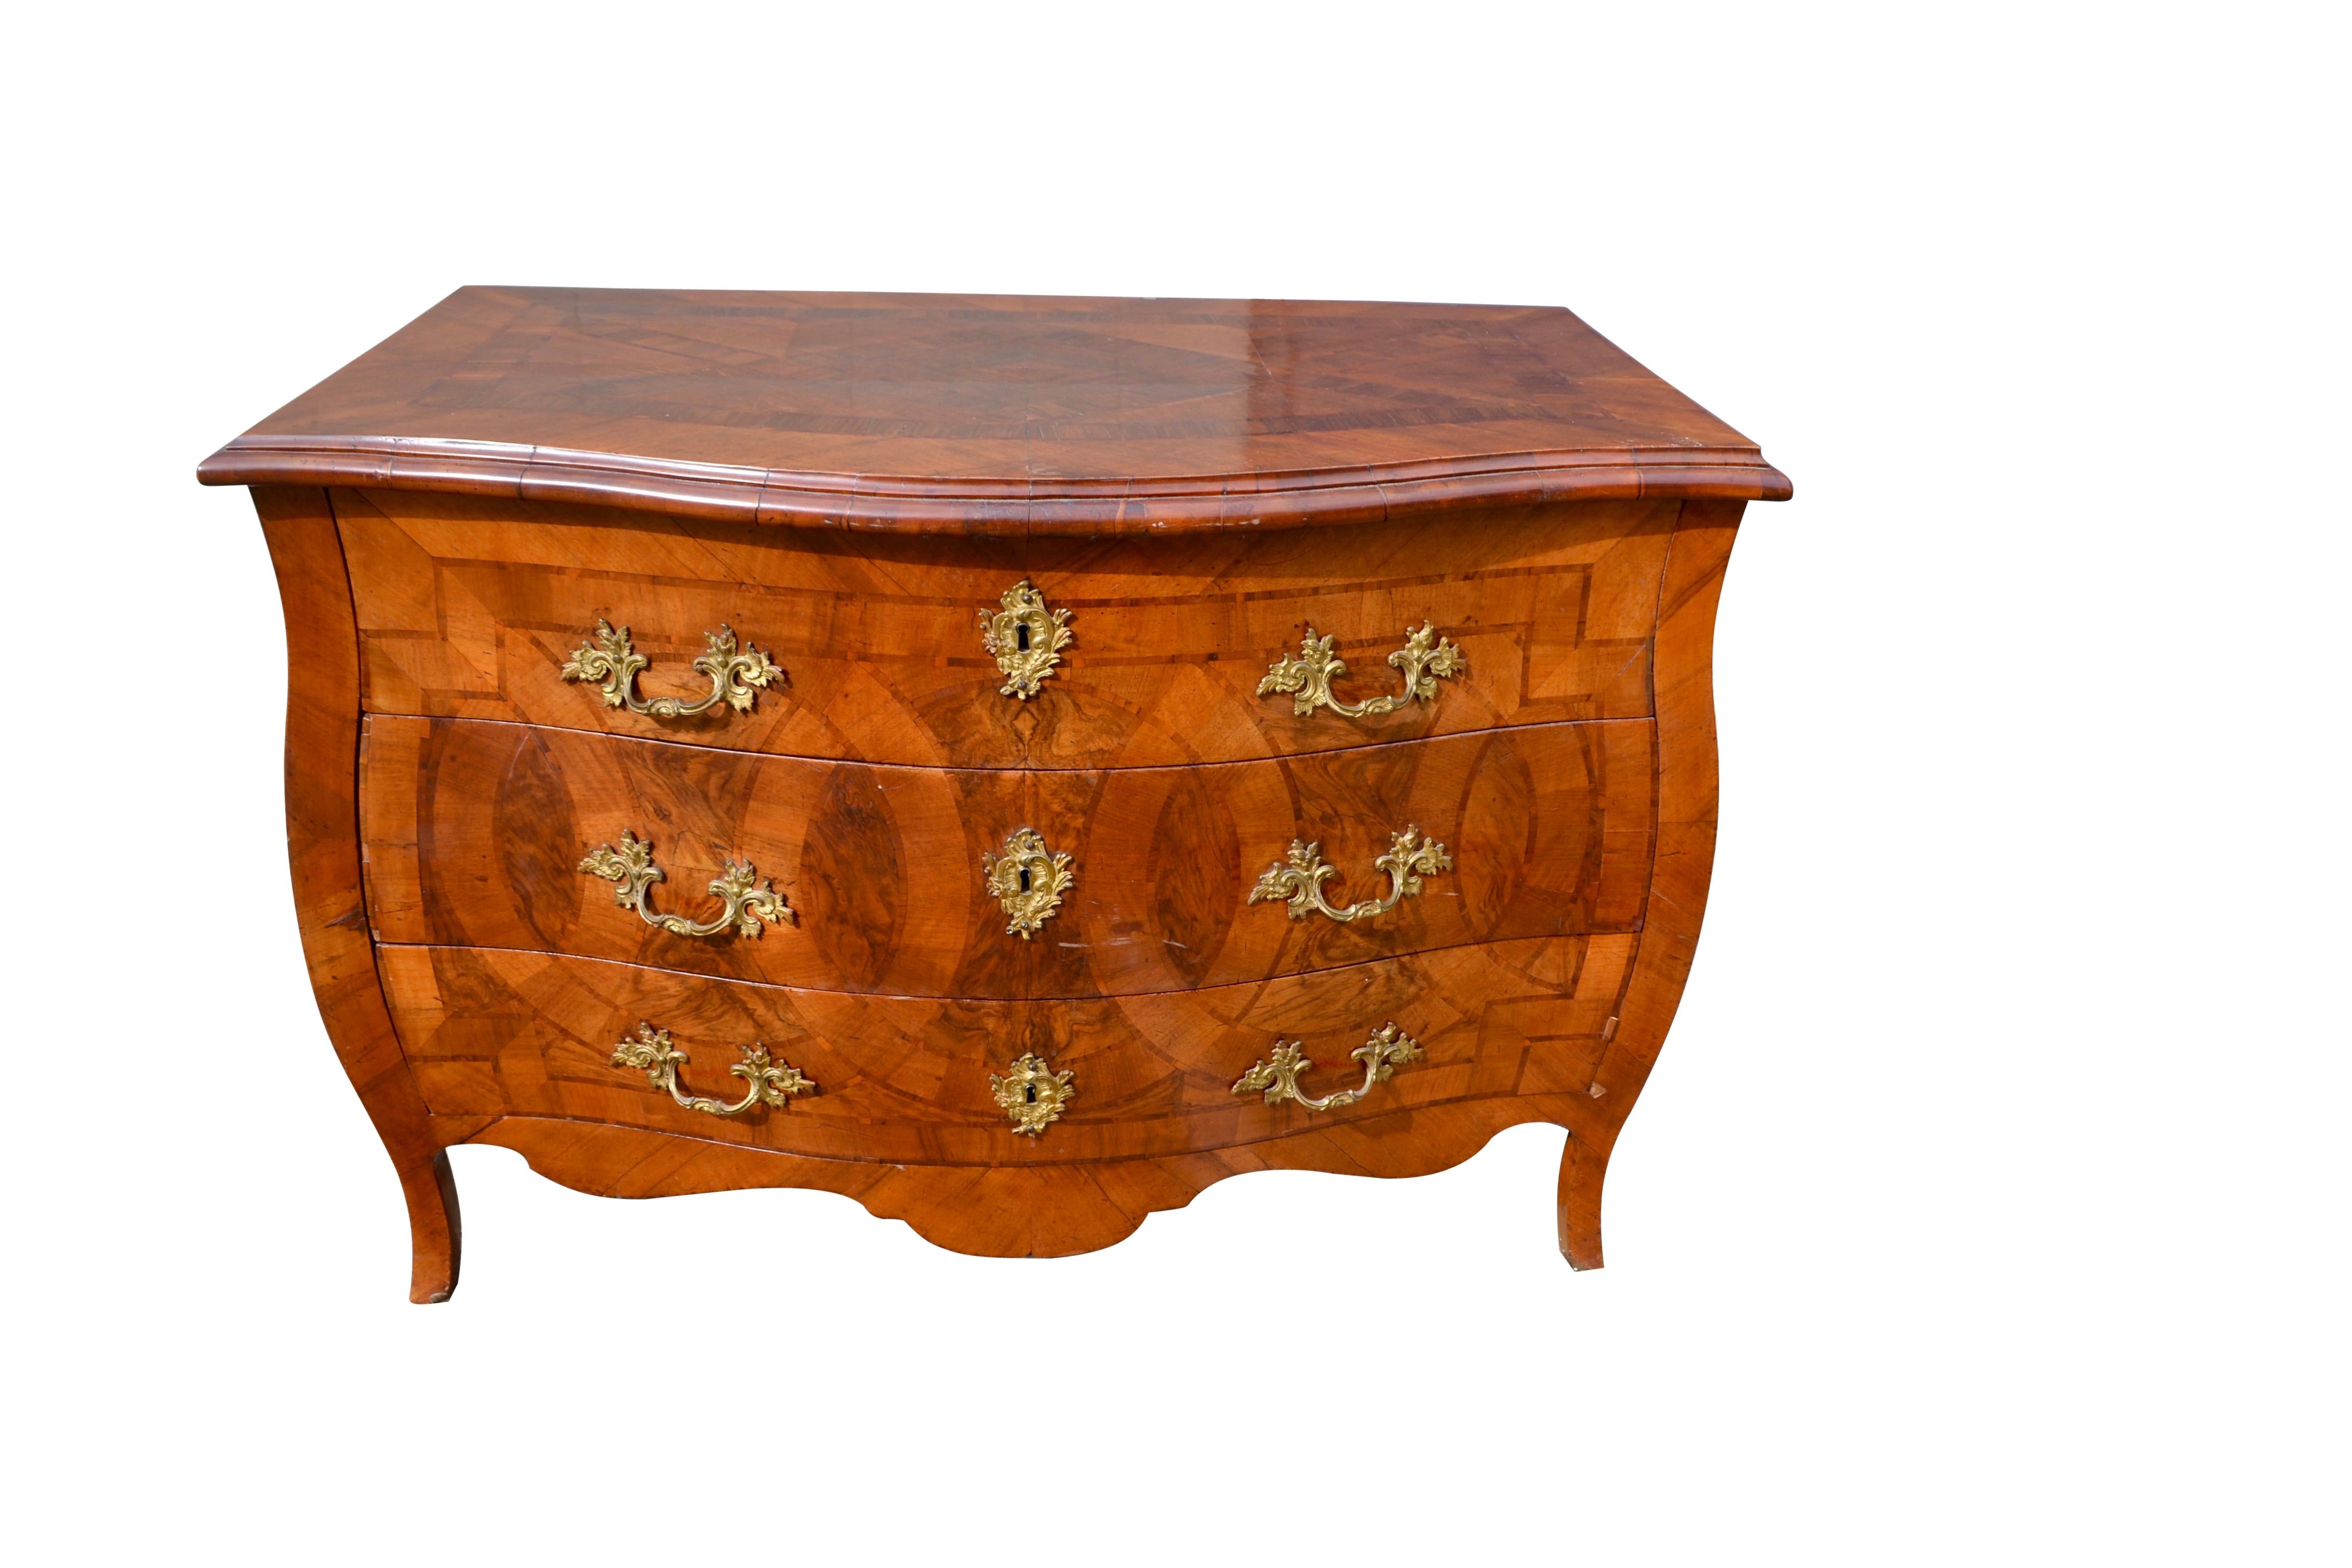 Olive 18th Century Italian Louis XV Period Marquetry Bombe Chest of Drawers For Sale